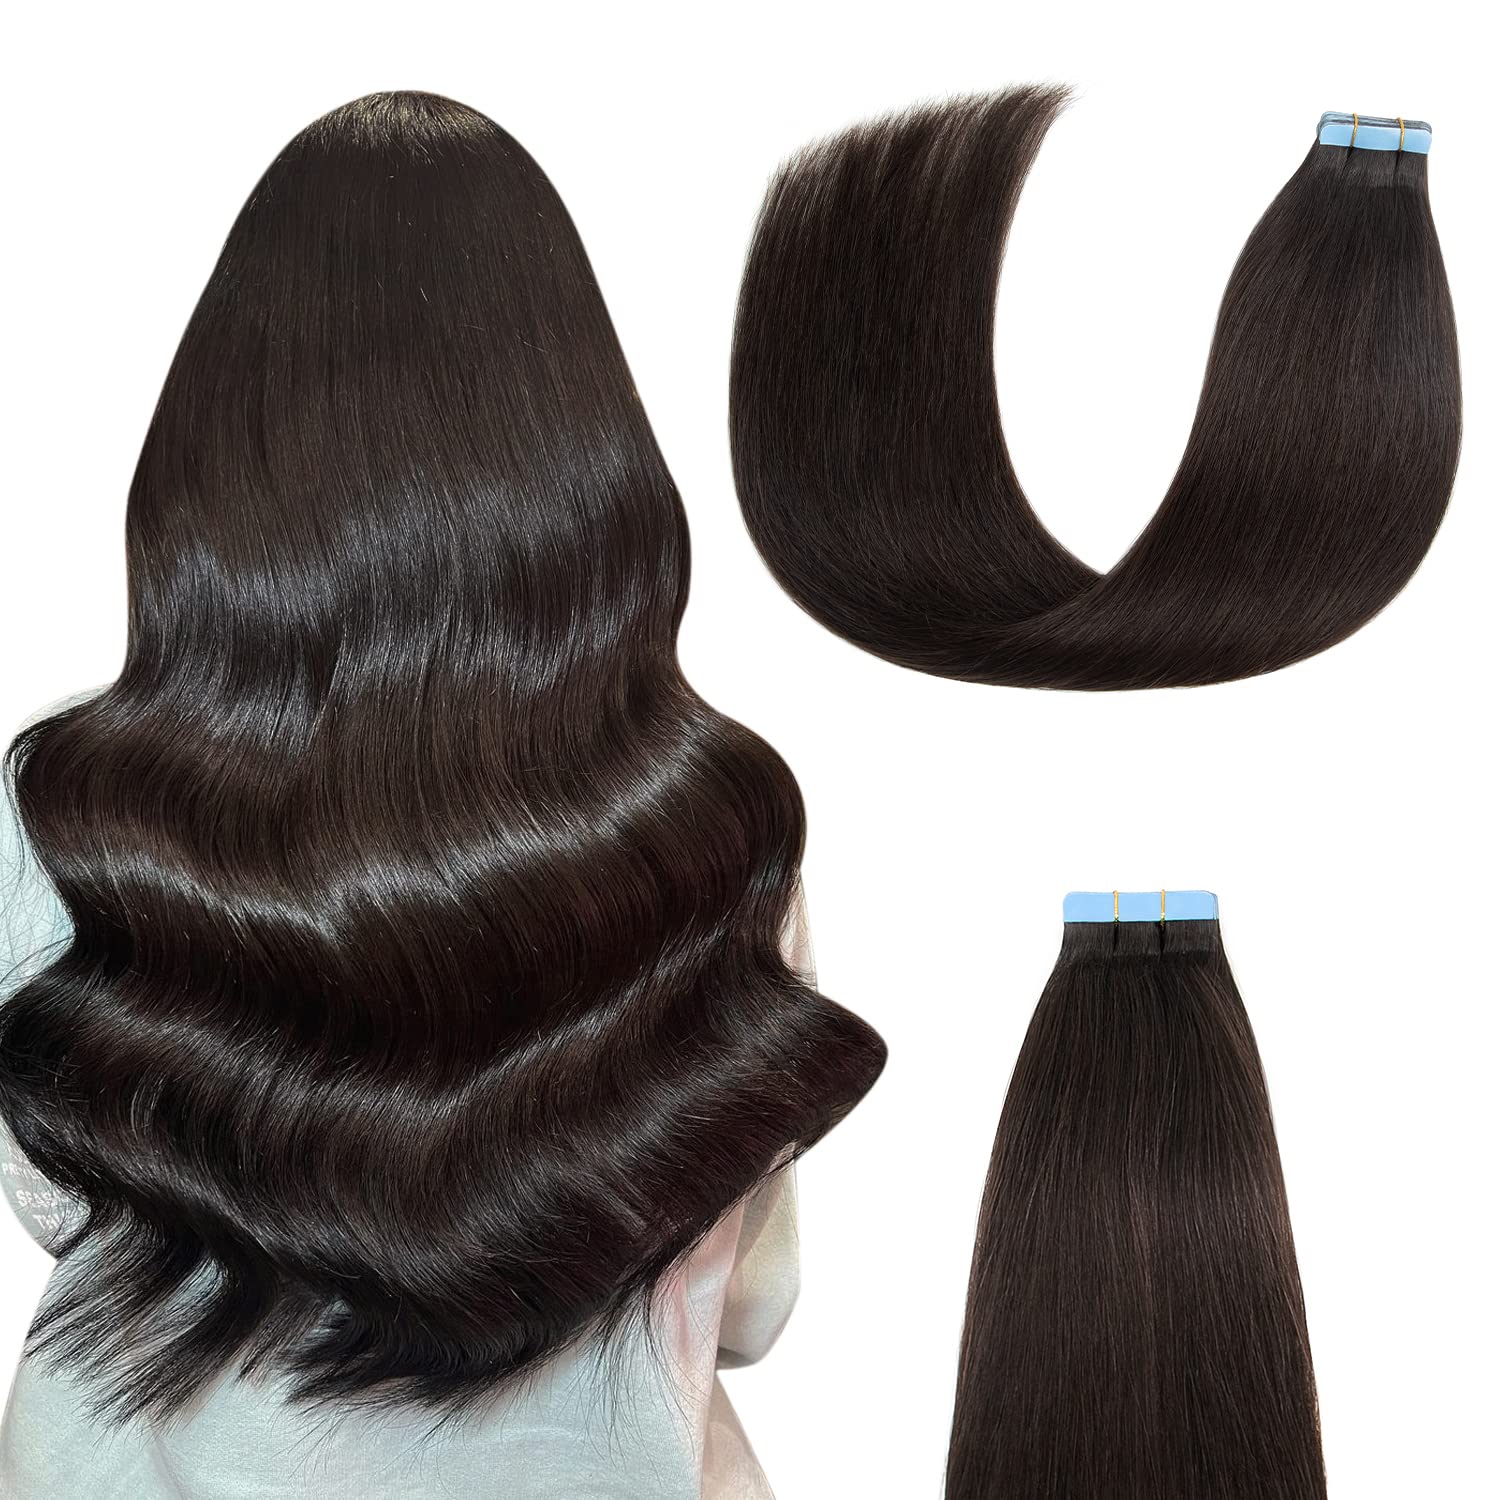 AGMITY Tape in Hair Extensions Real Human Hair 20 [...]